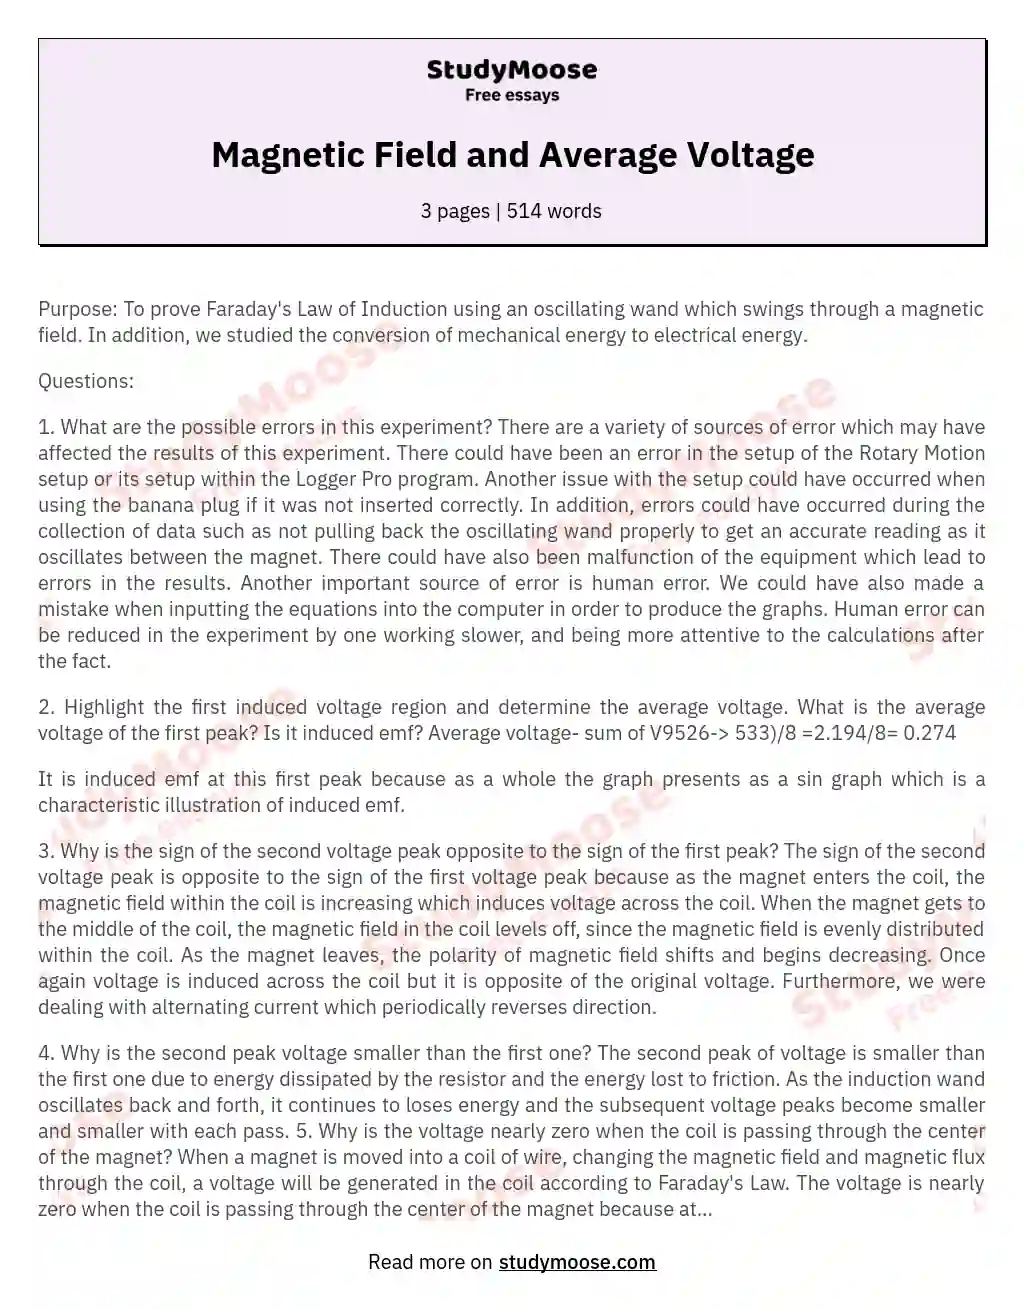 Magnetic Field and Average Voltage essay